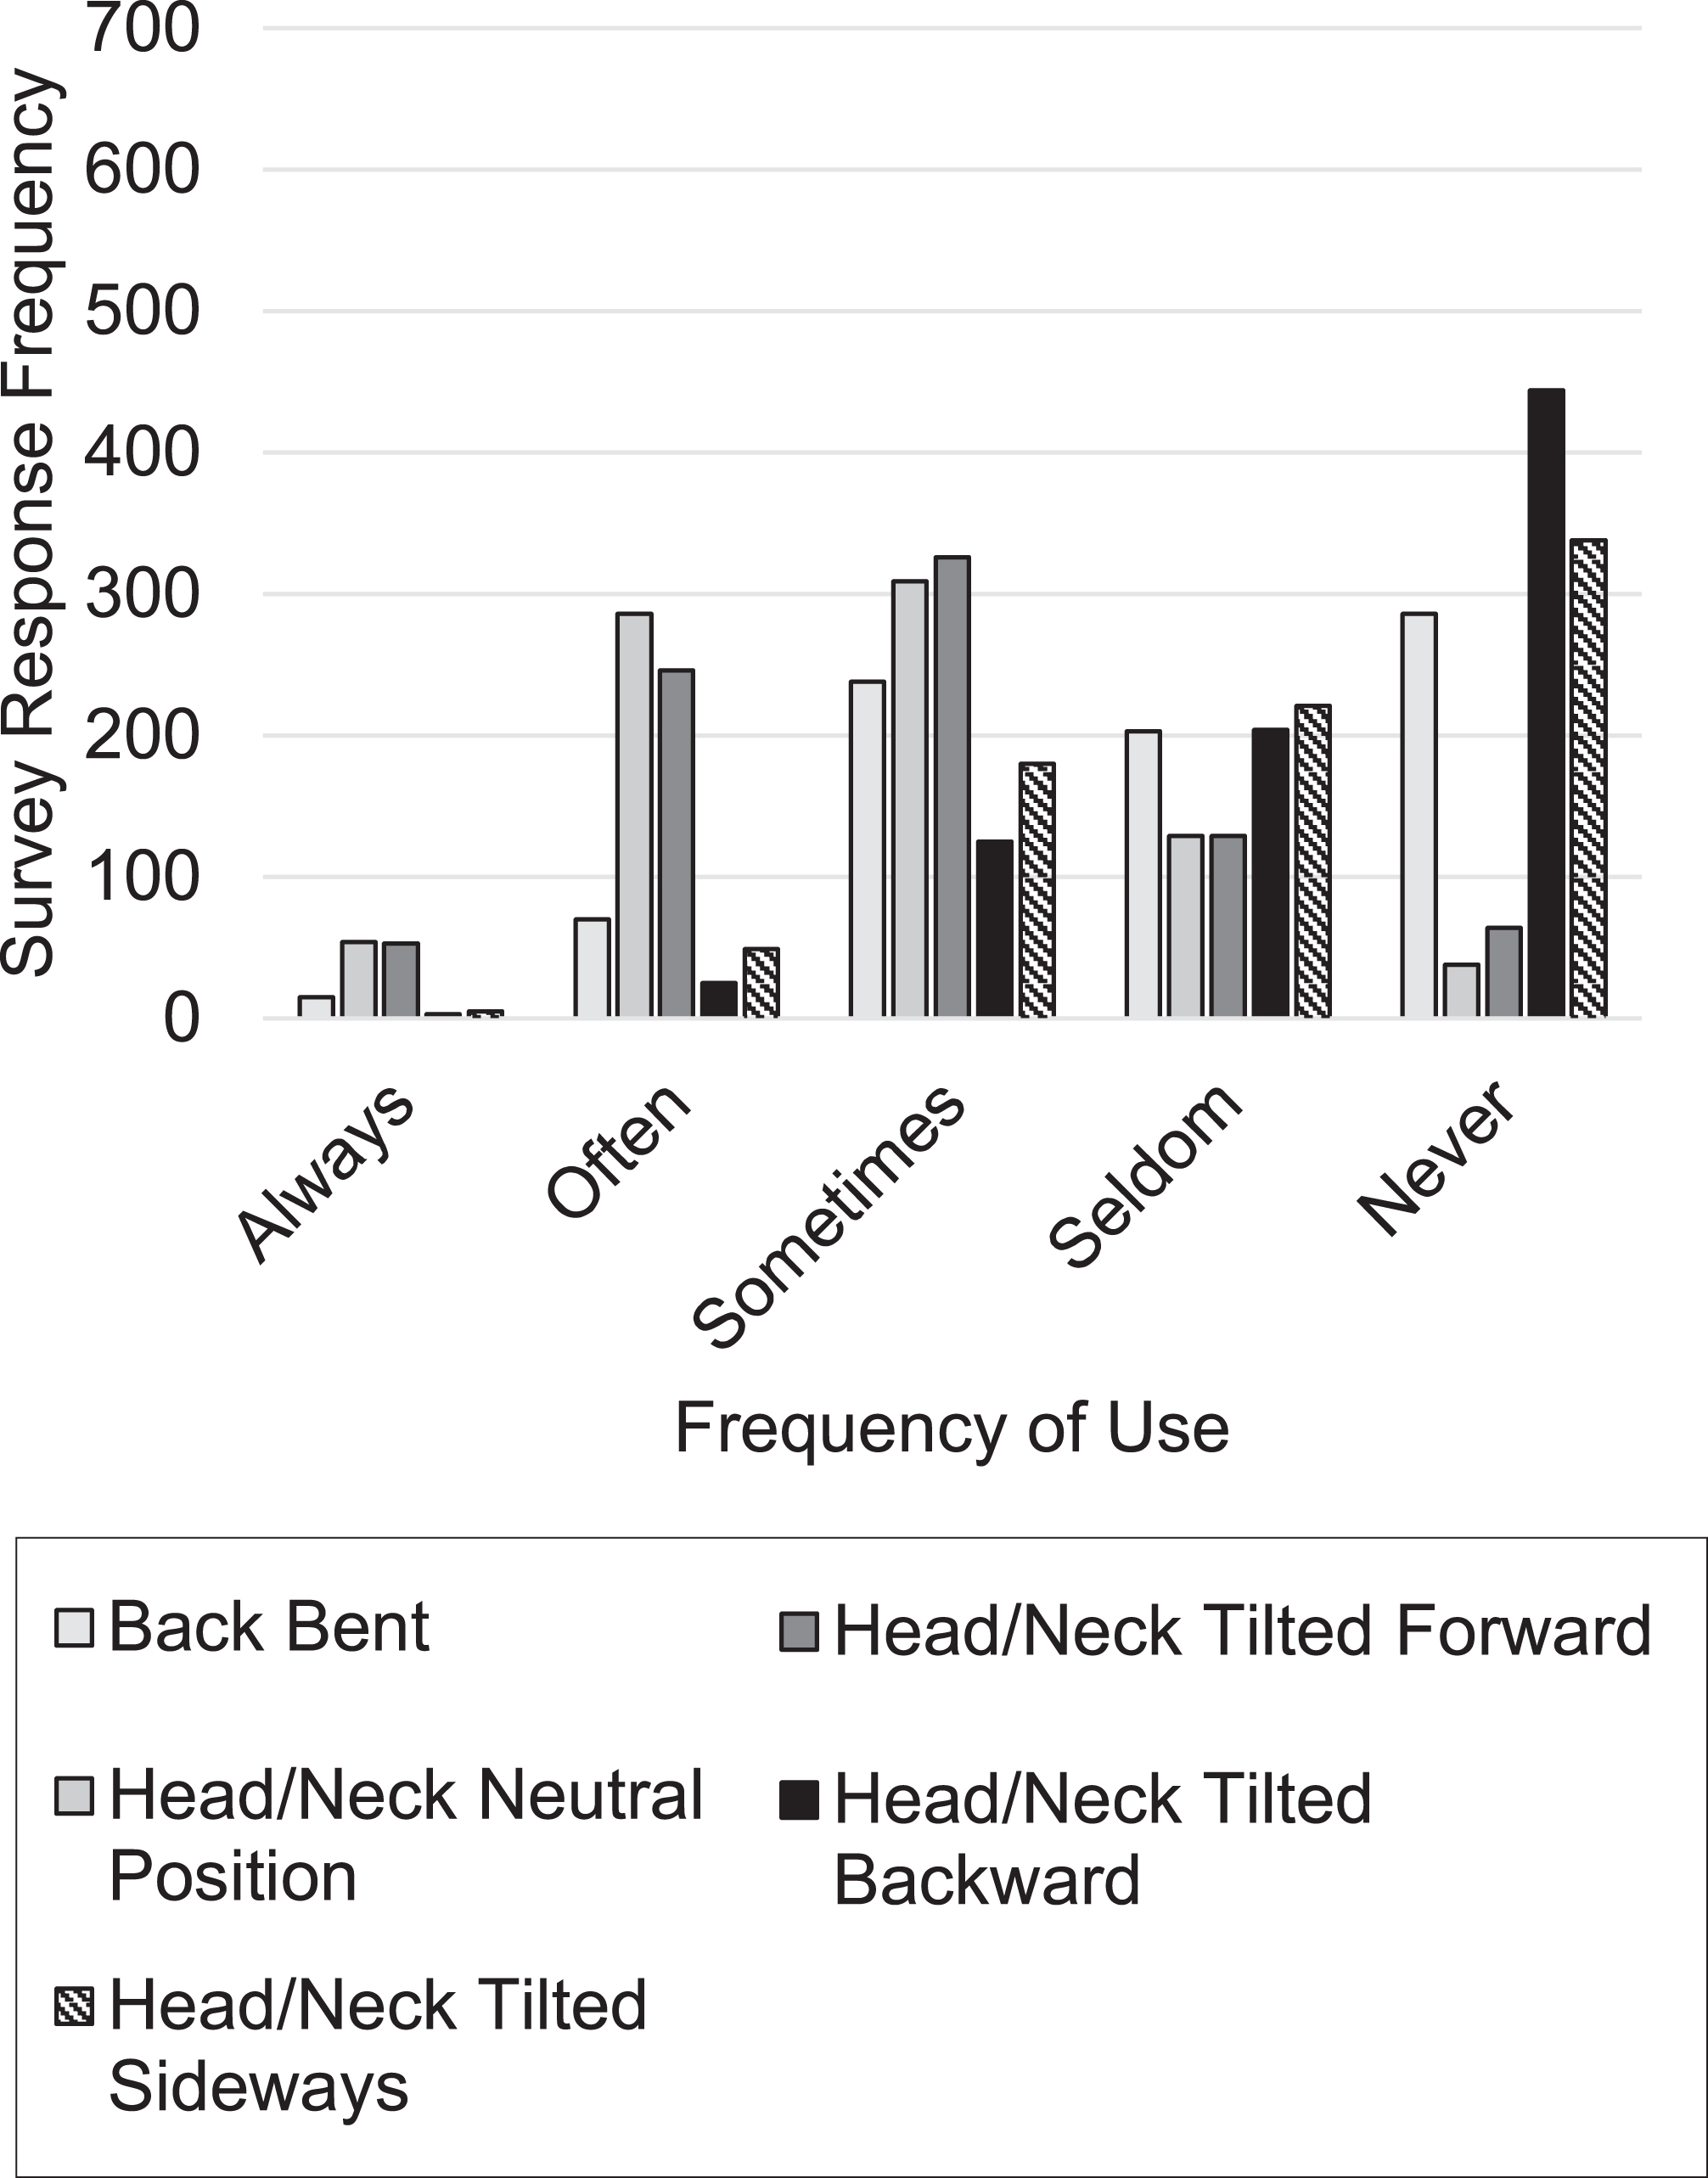 Frequency of time spent in a poor body posture for back and head/neck.